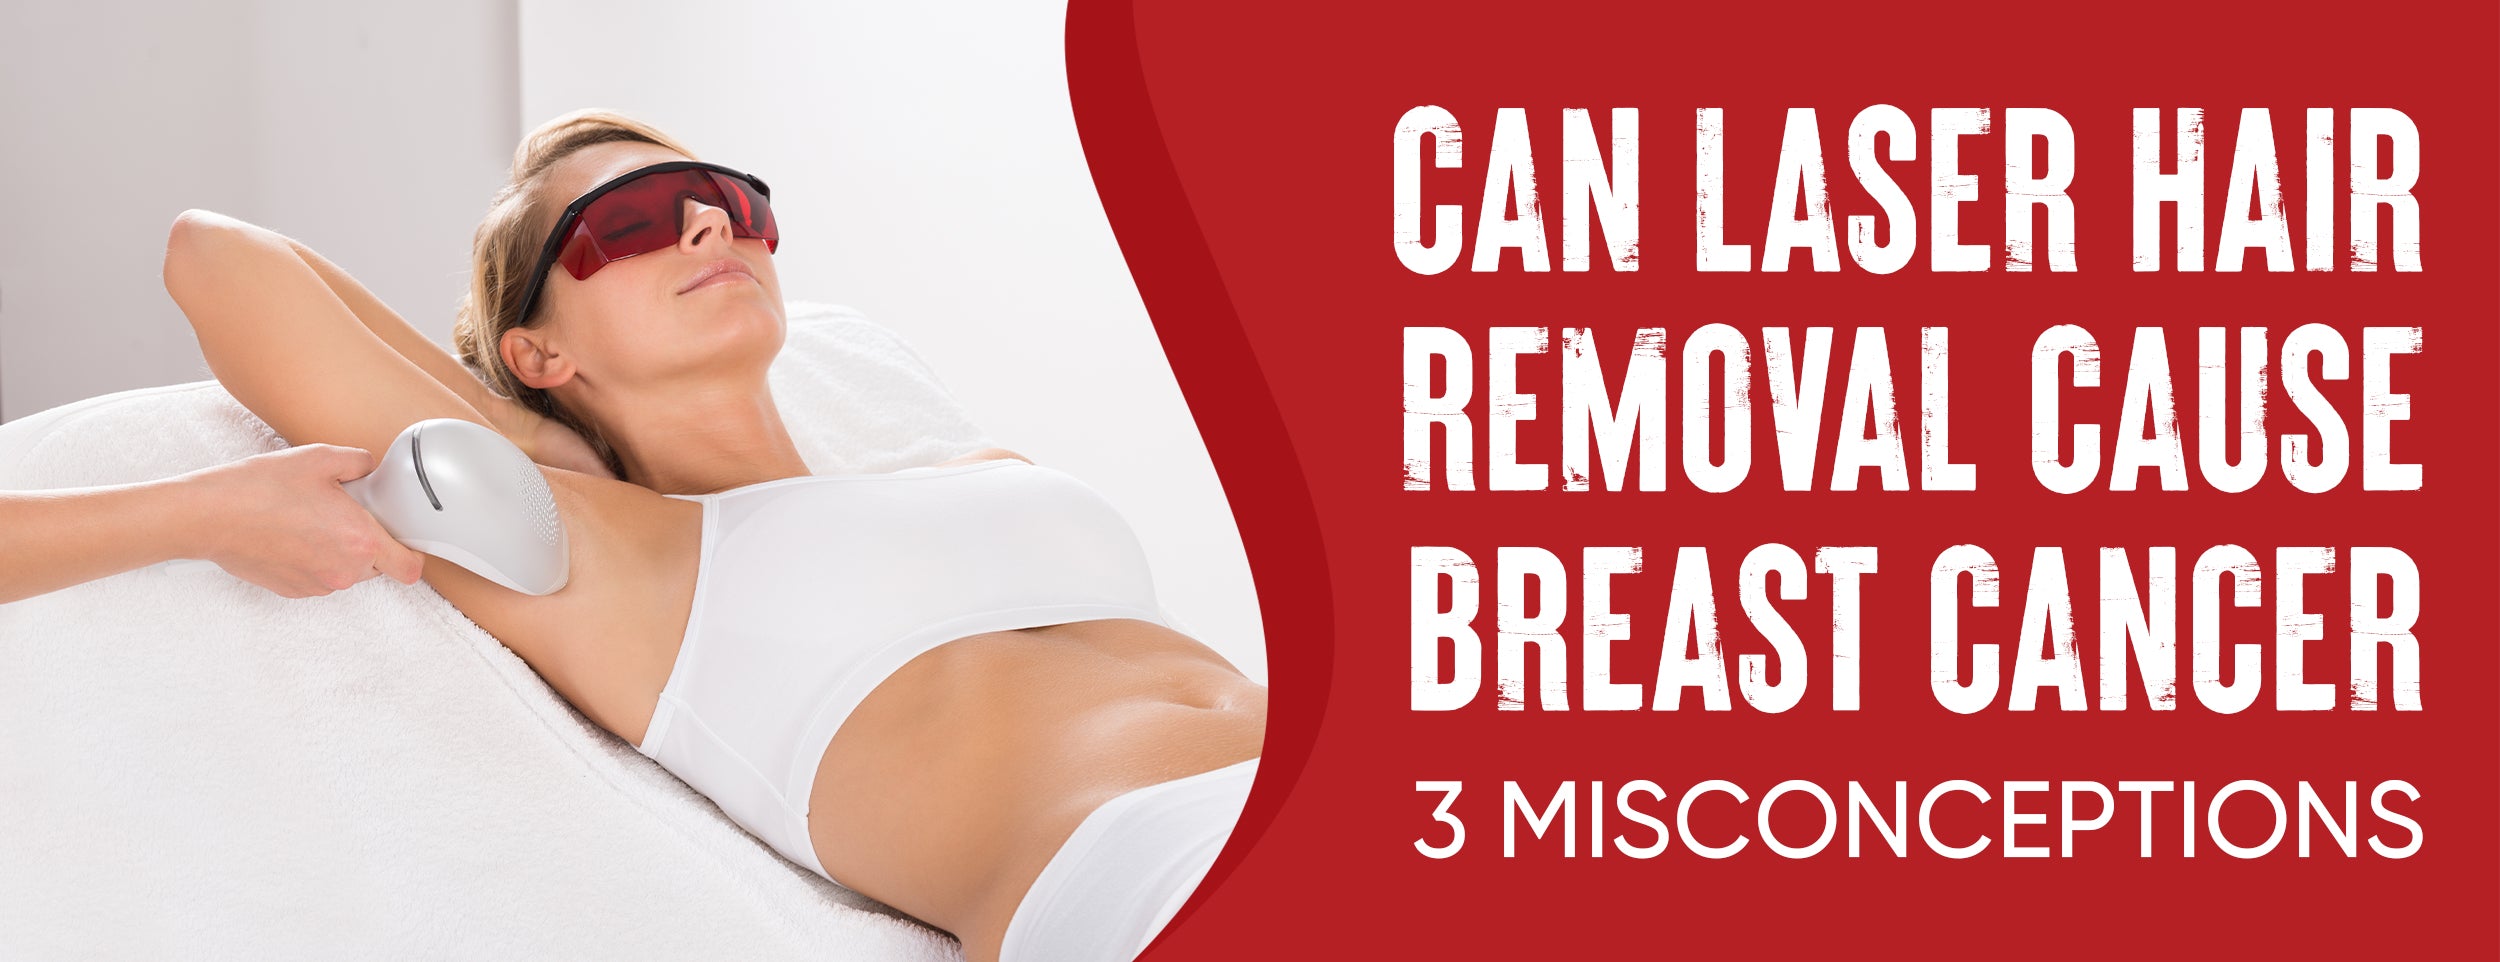 3 misconceptions about laser hair removal and potential impact on breast cancer